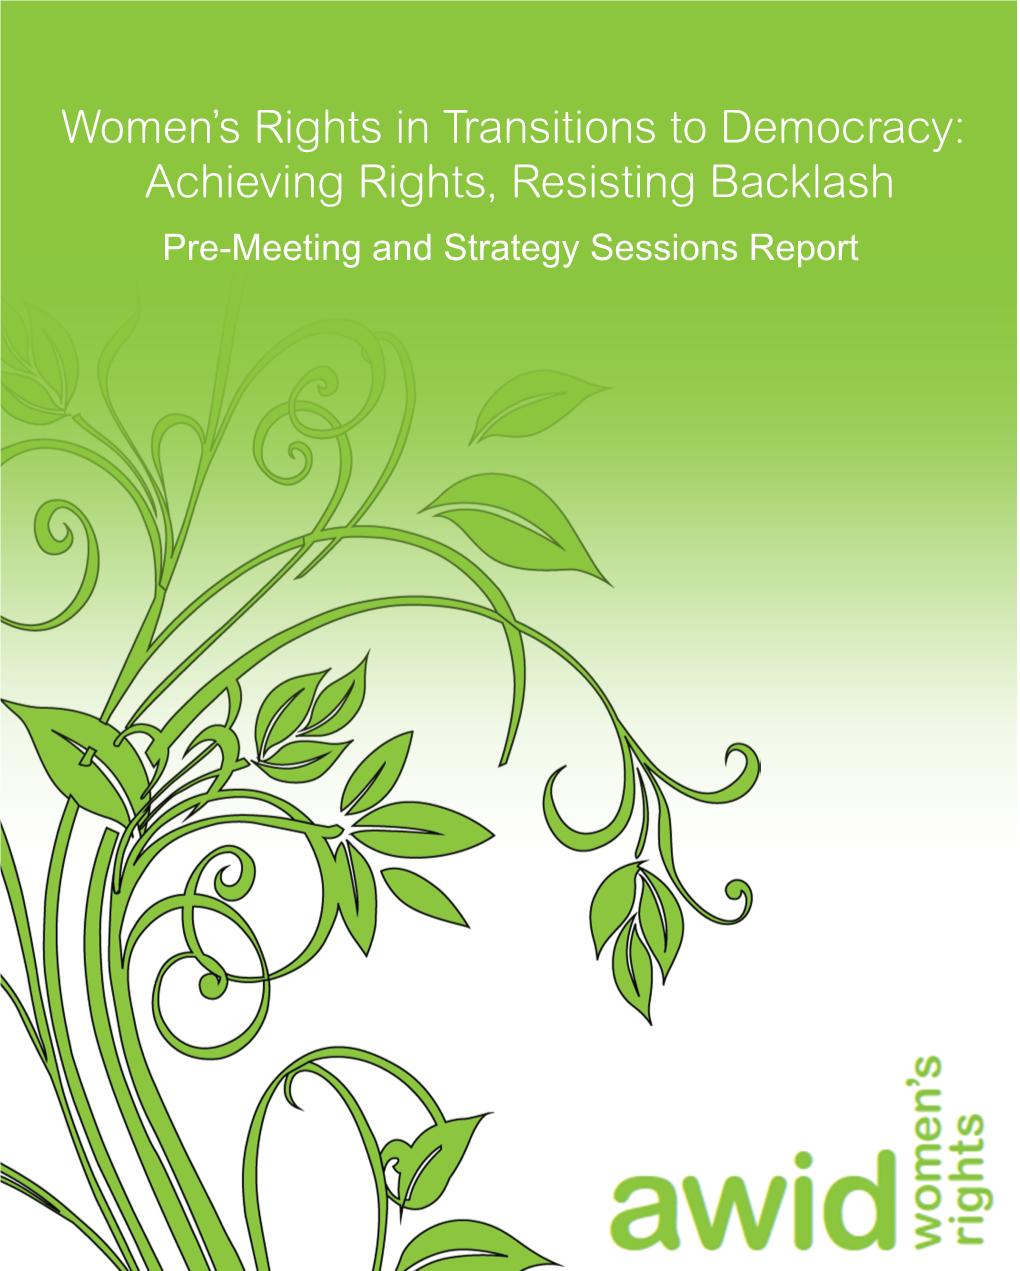 Achieving Rights, Resisting Backlash Pre-Meeting and Strategy Sessions Report Women’S Rights and Transitions to Democracy: Achieving Rights, Resisting Backlash